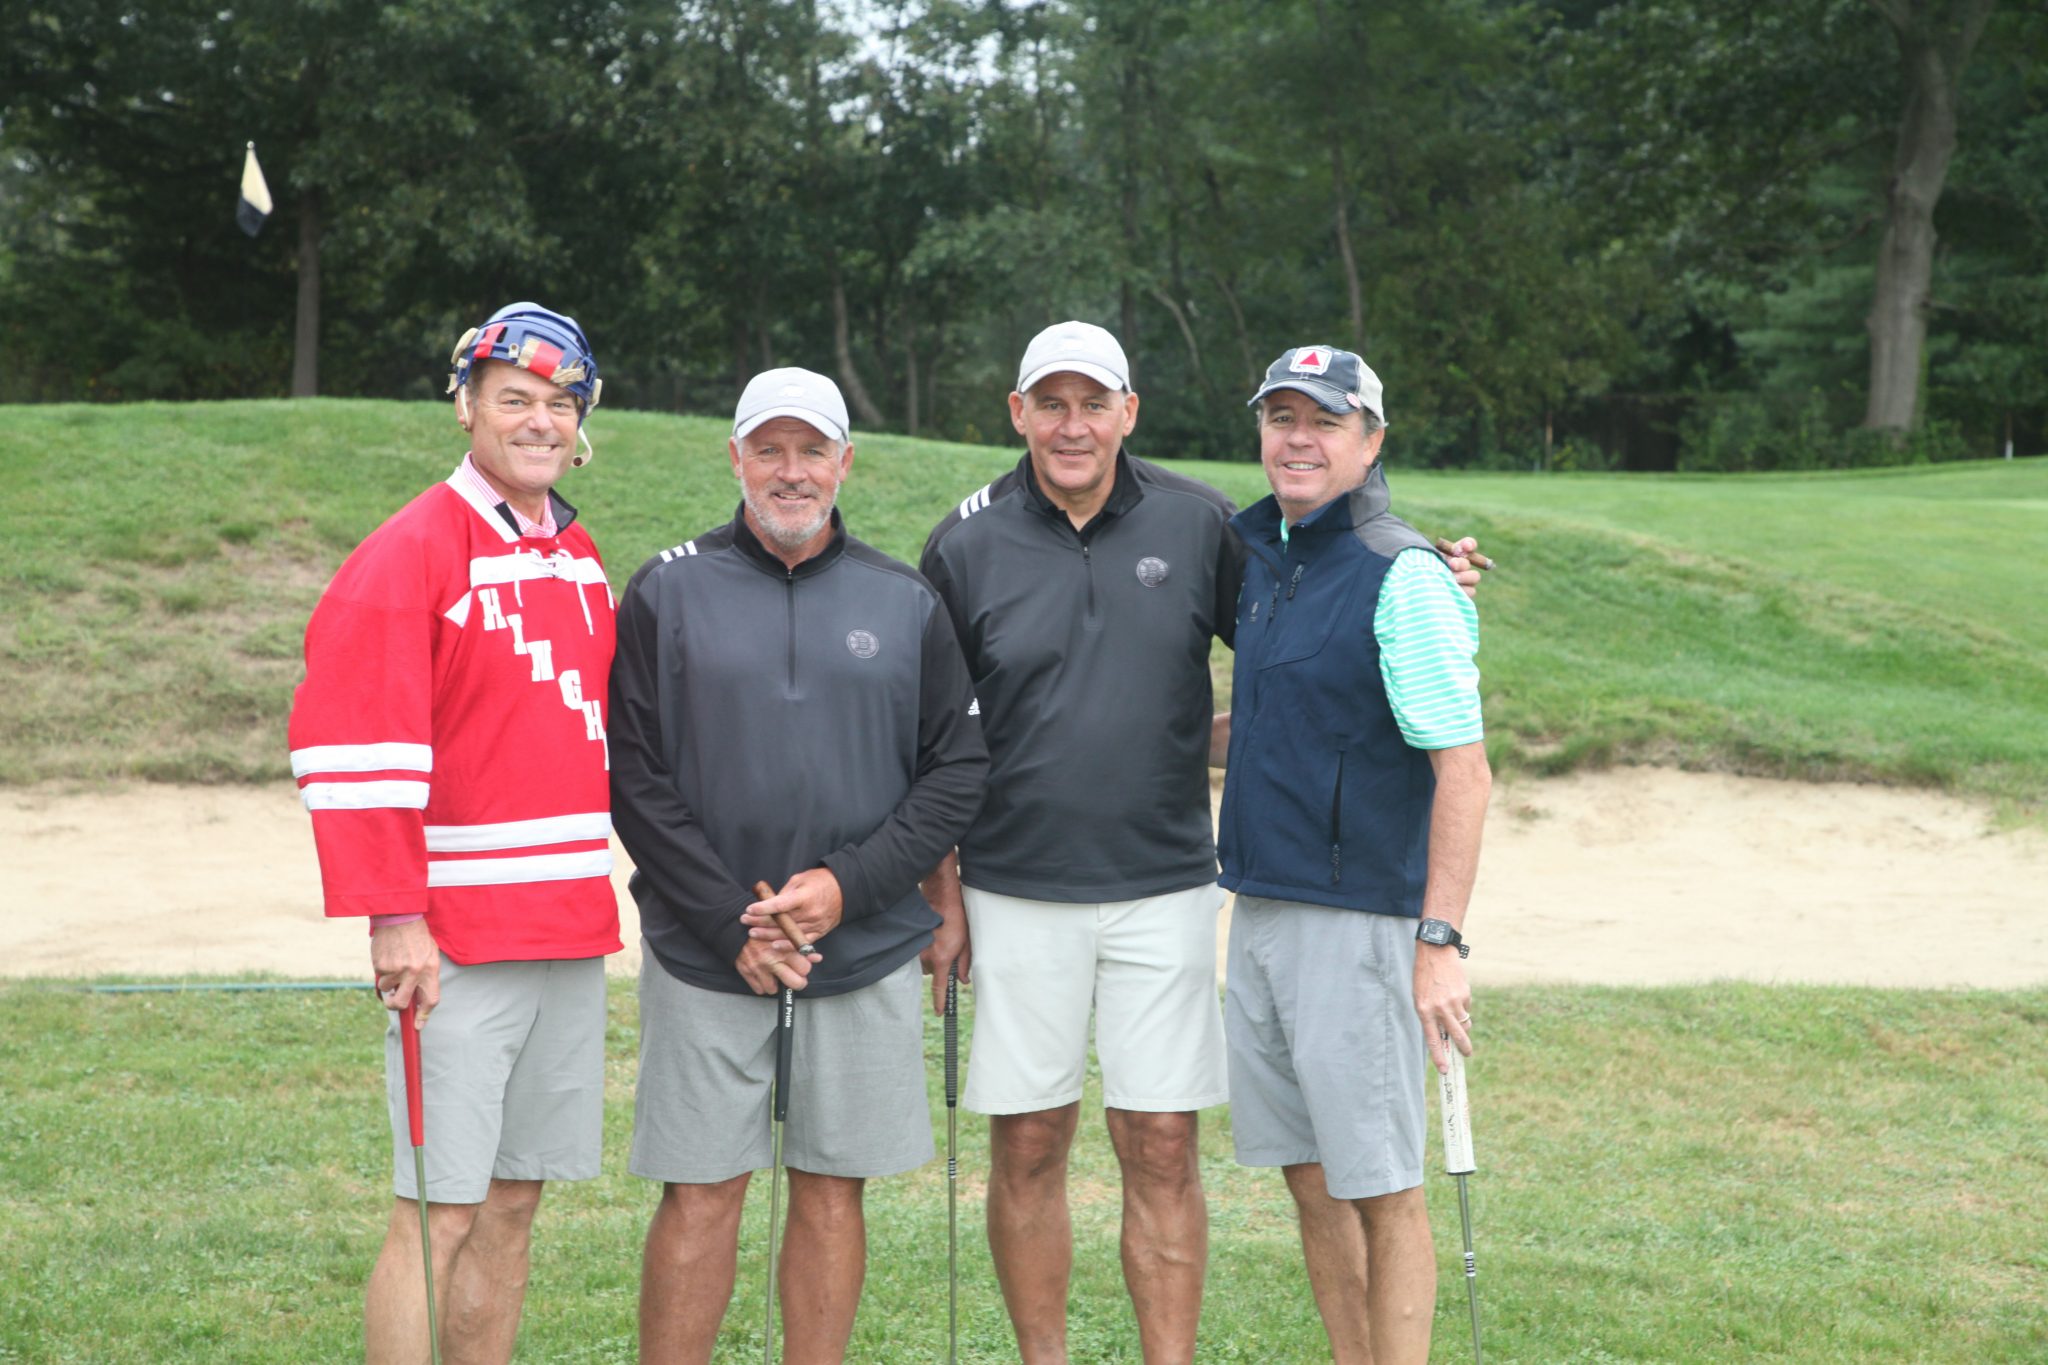 Some familiar faces showed up to play - former HSP president Fred Hussey, Bruins TV broadcaster Andy Brickley,  Bruins radio broadcaster Bob Beers and Jack Concannon.